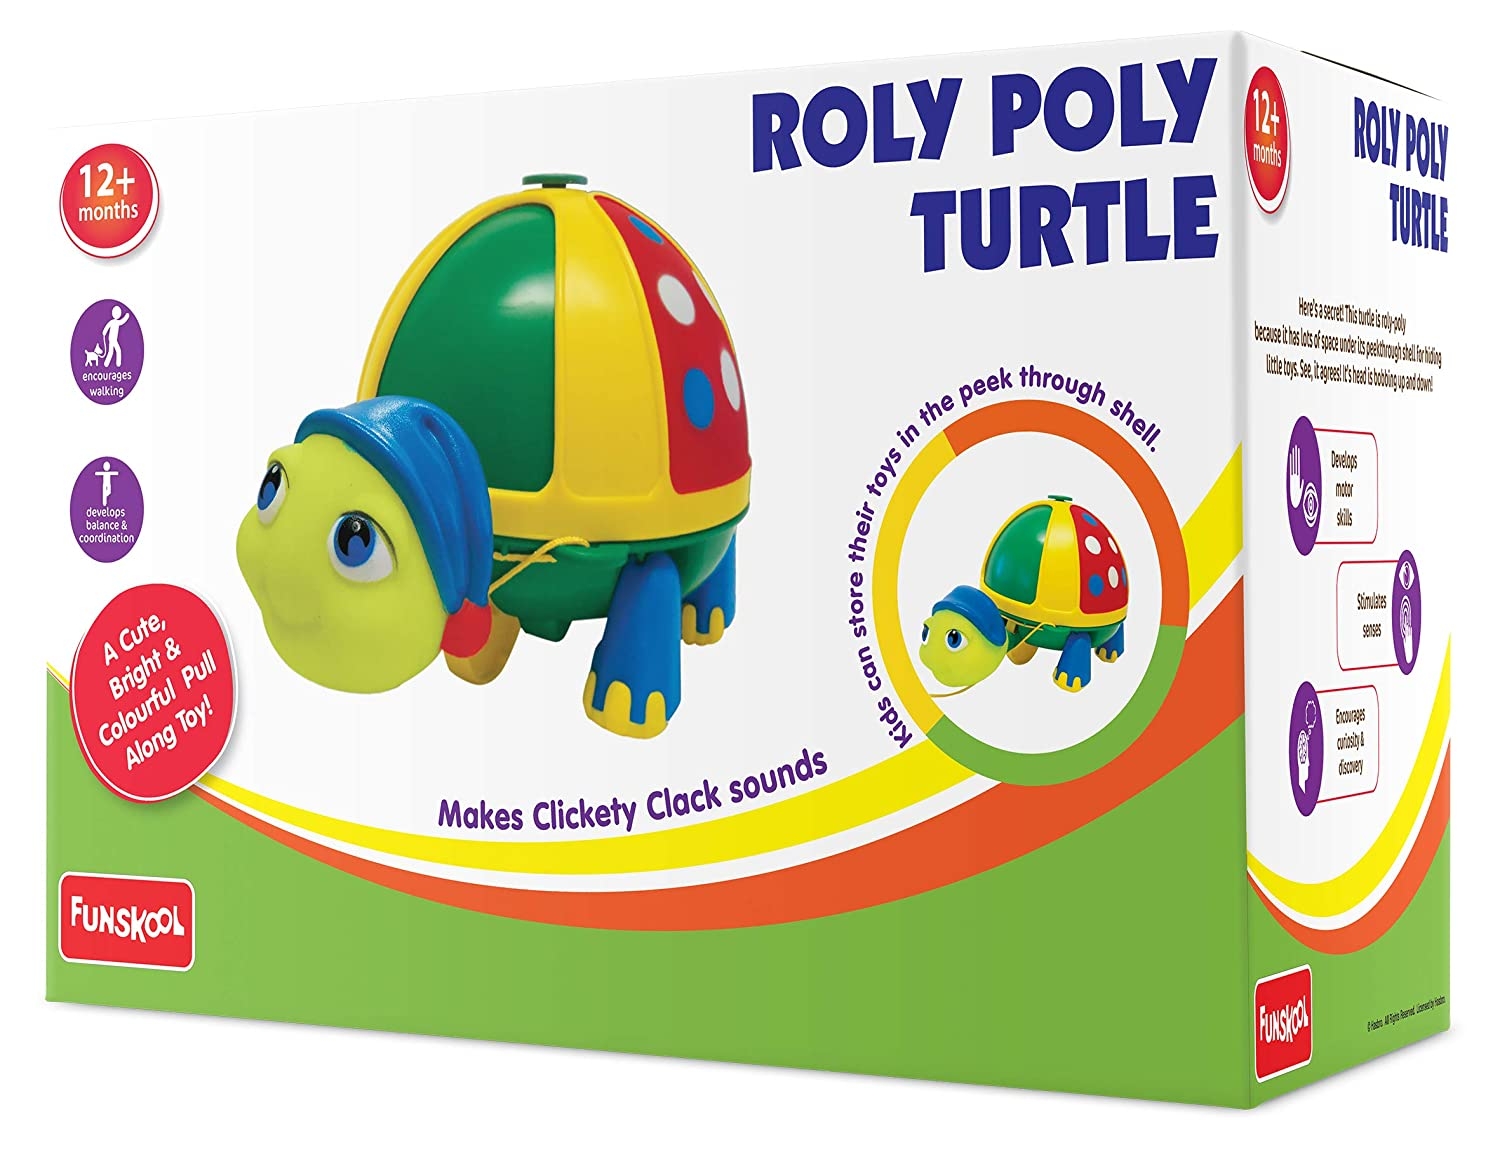 Funskool | Roly Poly Turtle undefined